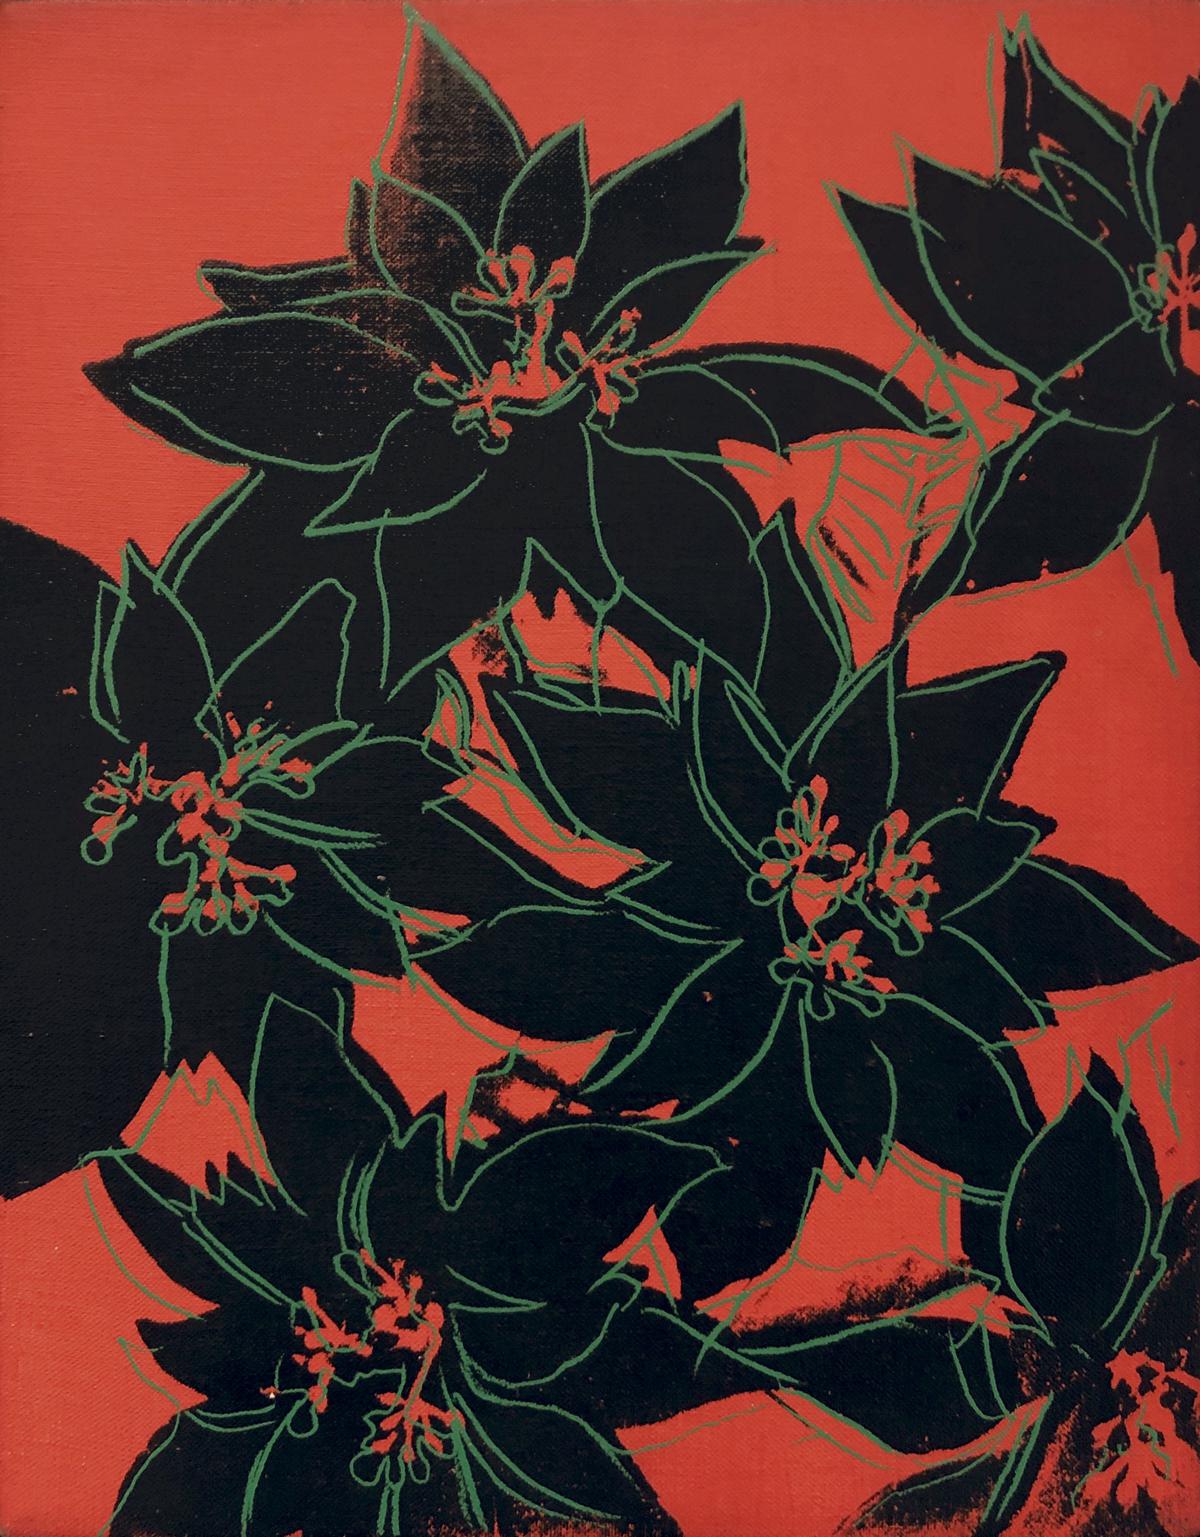 An artwork from Andy Warhol’s Poinsettia series